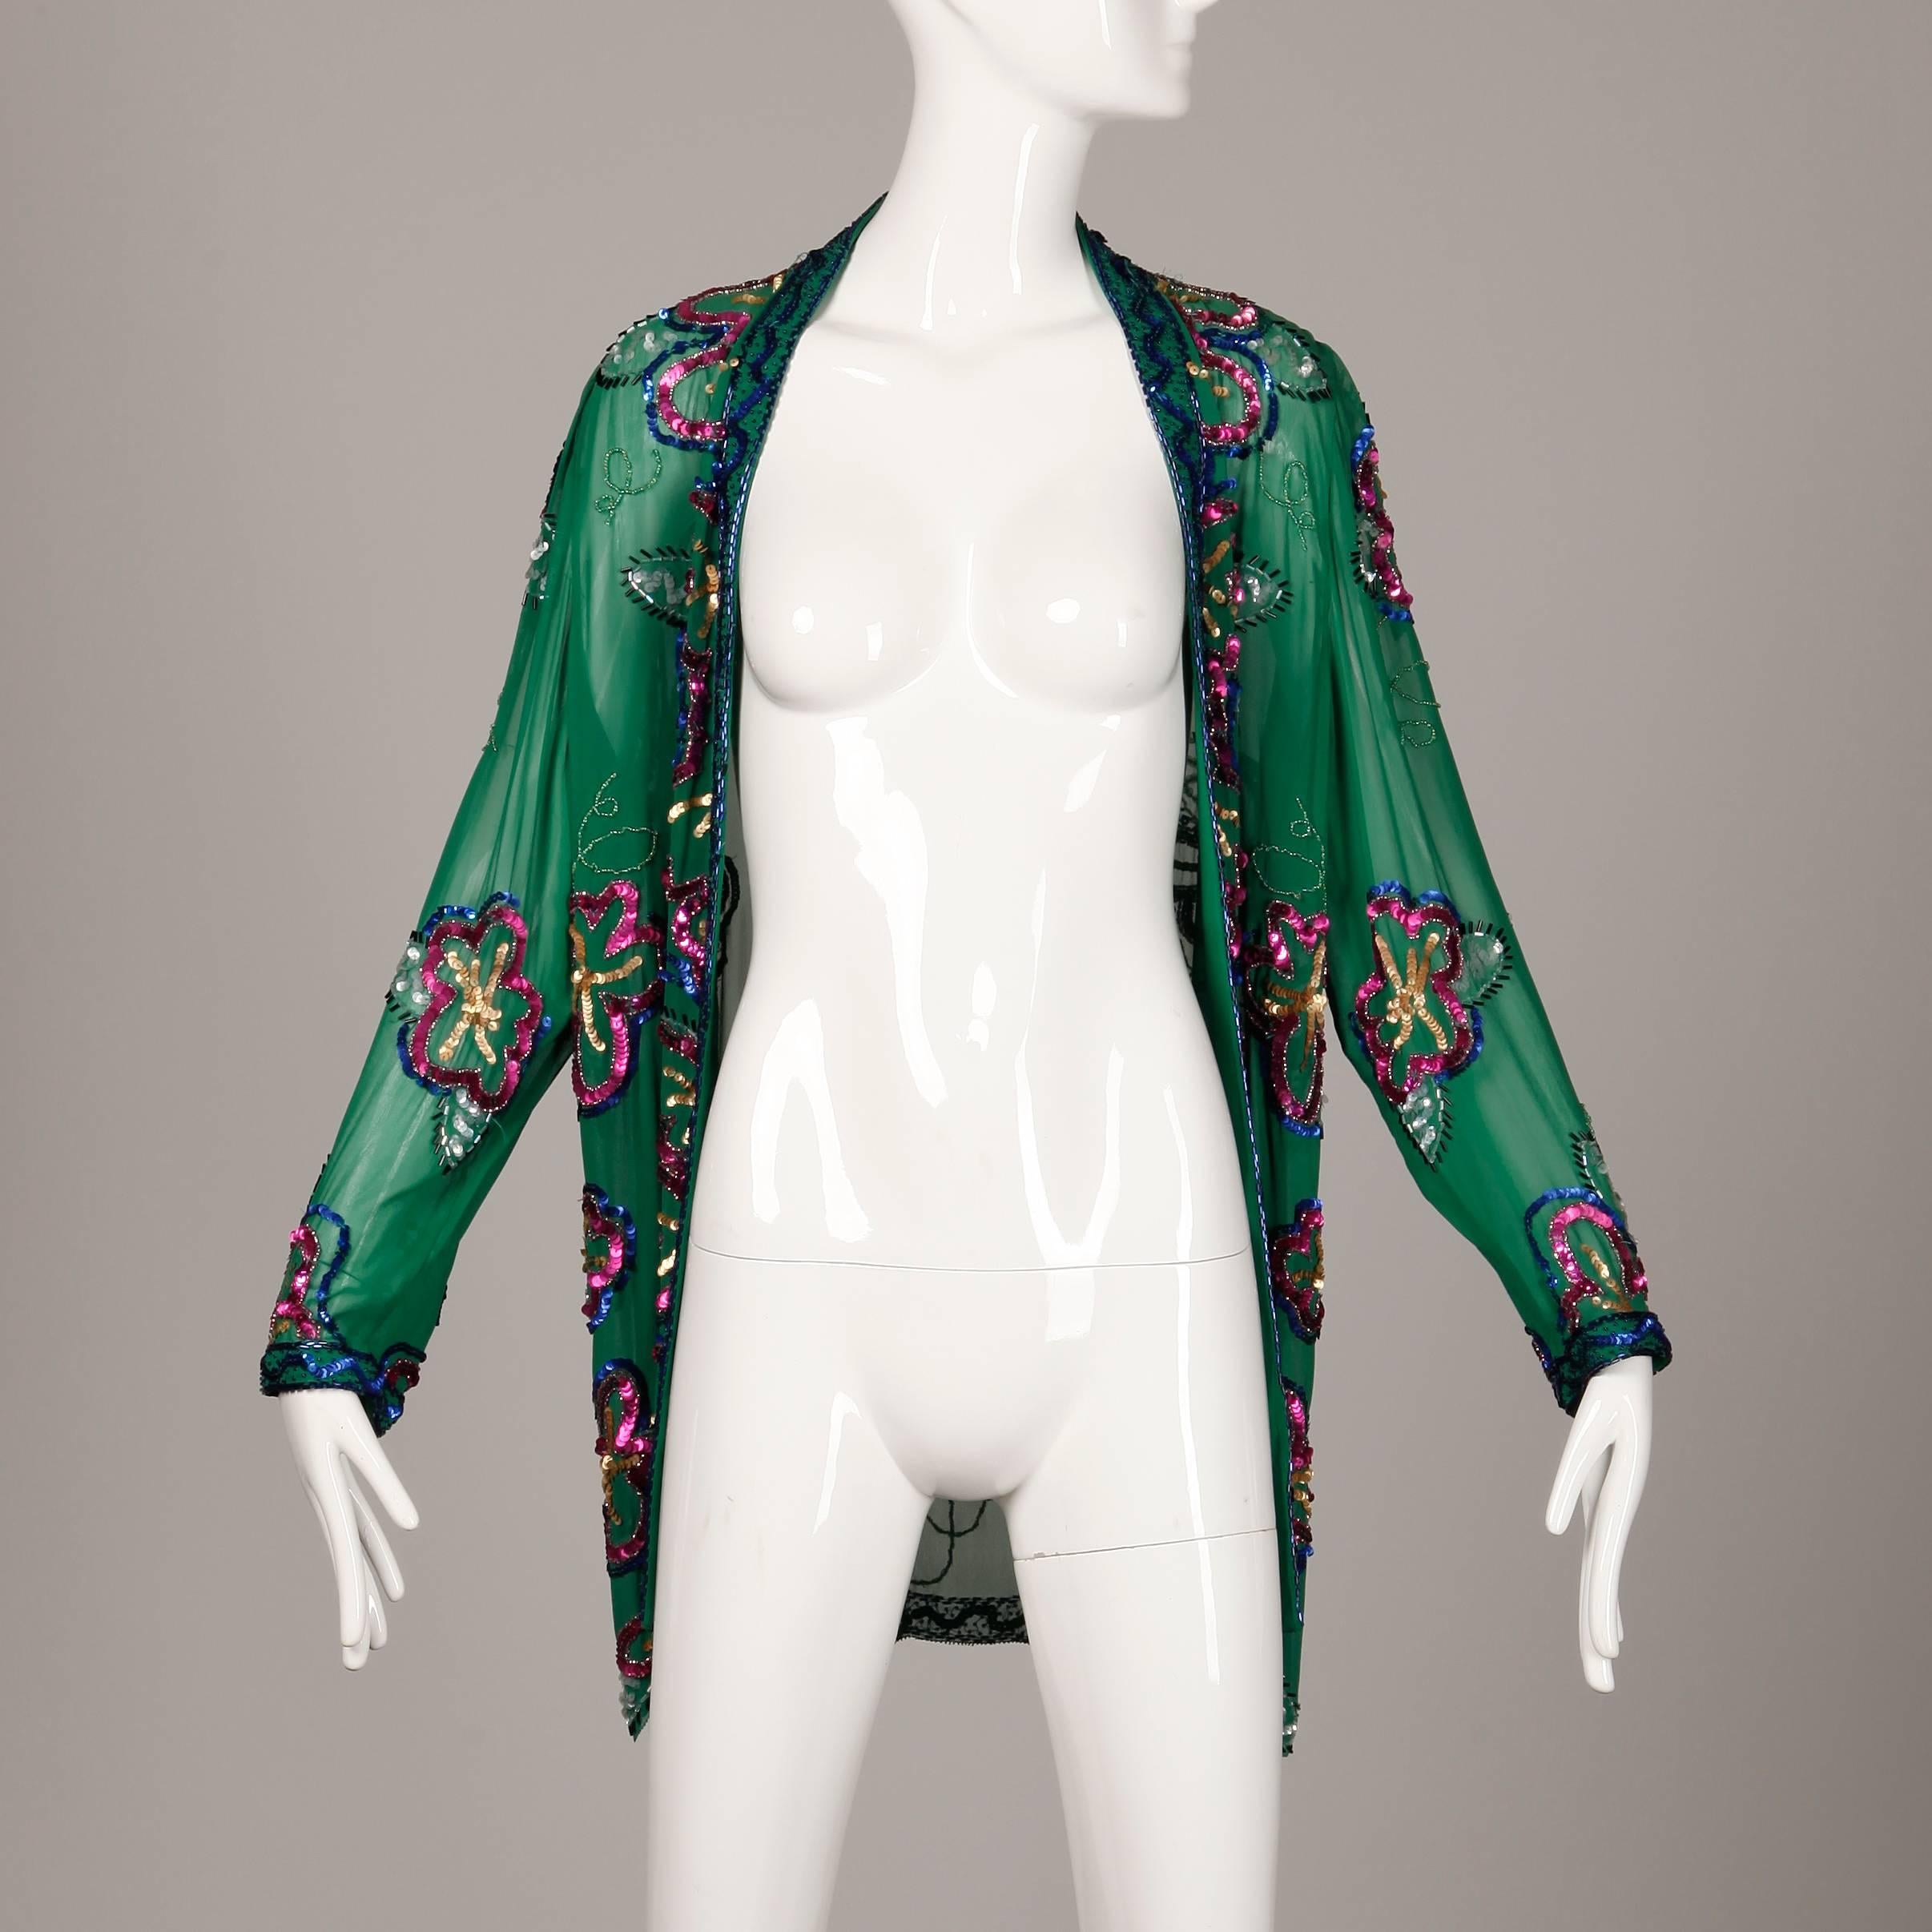 Shimmery 1980s sheer green silk jacket by Fabrice with colorful sequin and beadwork. Unlined, hangs open in the front. 100% silk. The marked size is an 8, and the jacket fits like a size small-medium. The bust measures 44